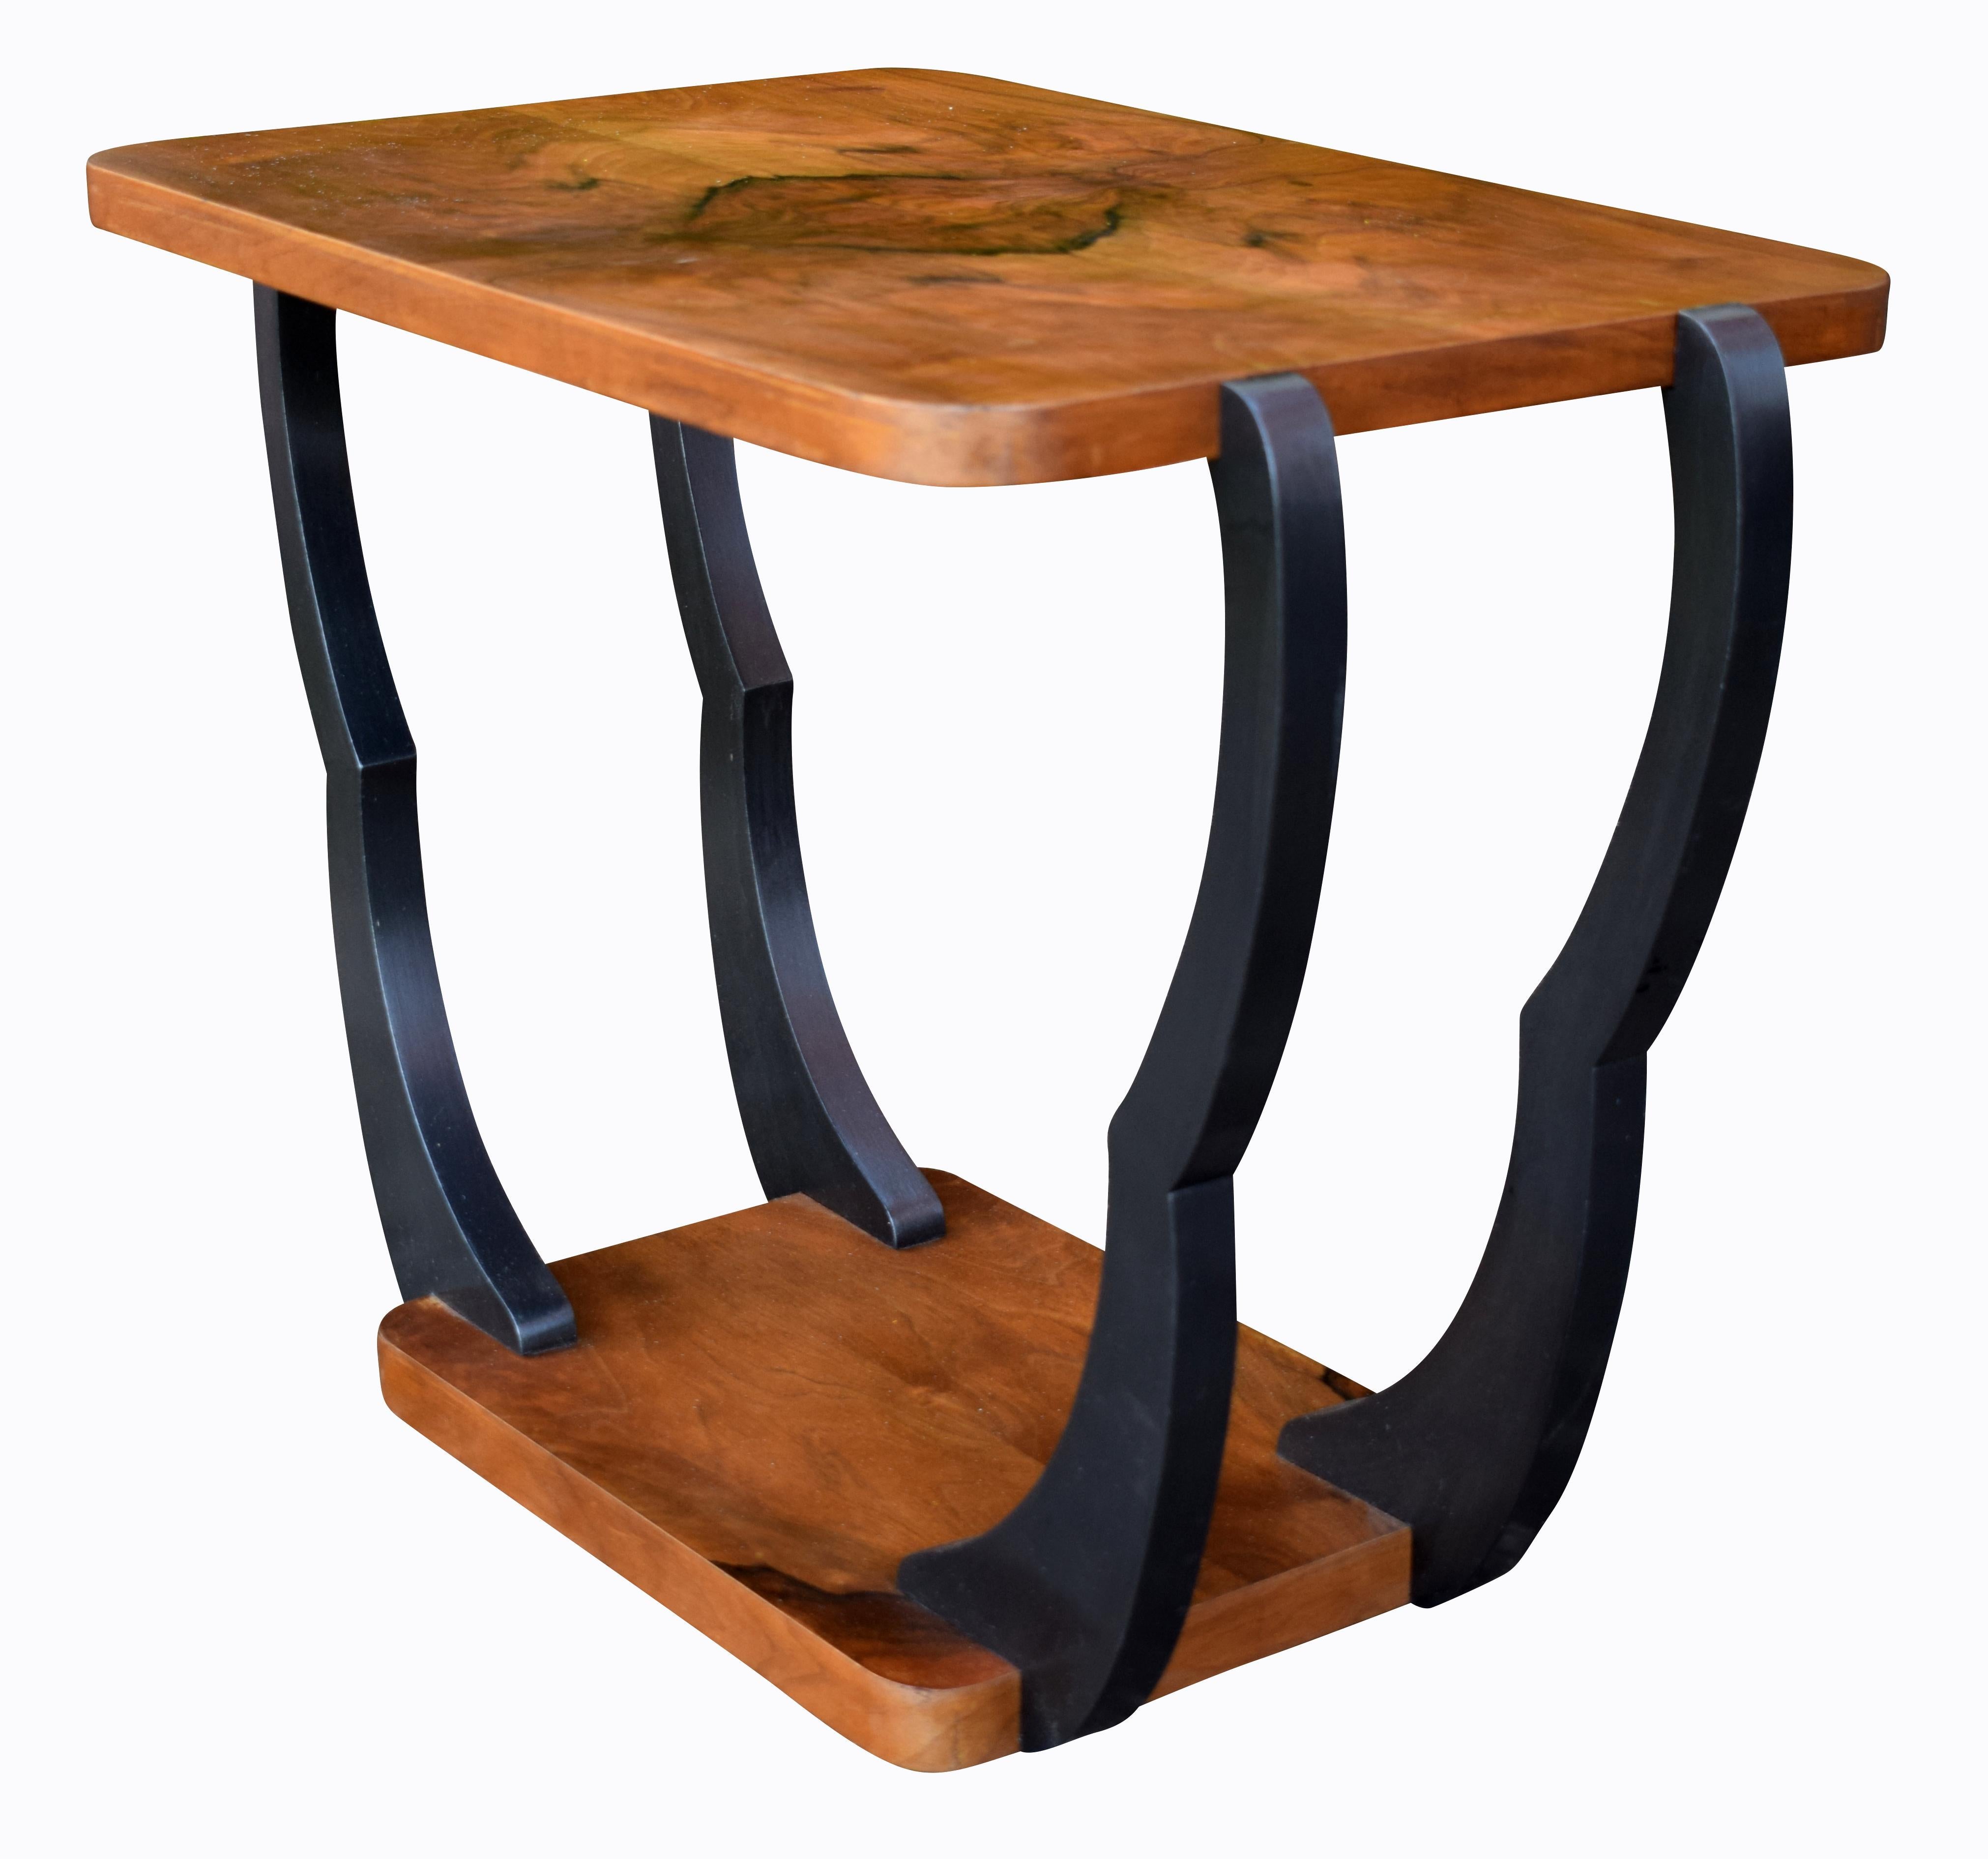 This is a stunning looking table with superb deco design and shape, dating to the 1930s. Ideal size for modern day use and easily integrated for most rooms. The ebonised distinctive looking legs contrasts beautifully with the highly figured walnut